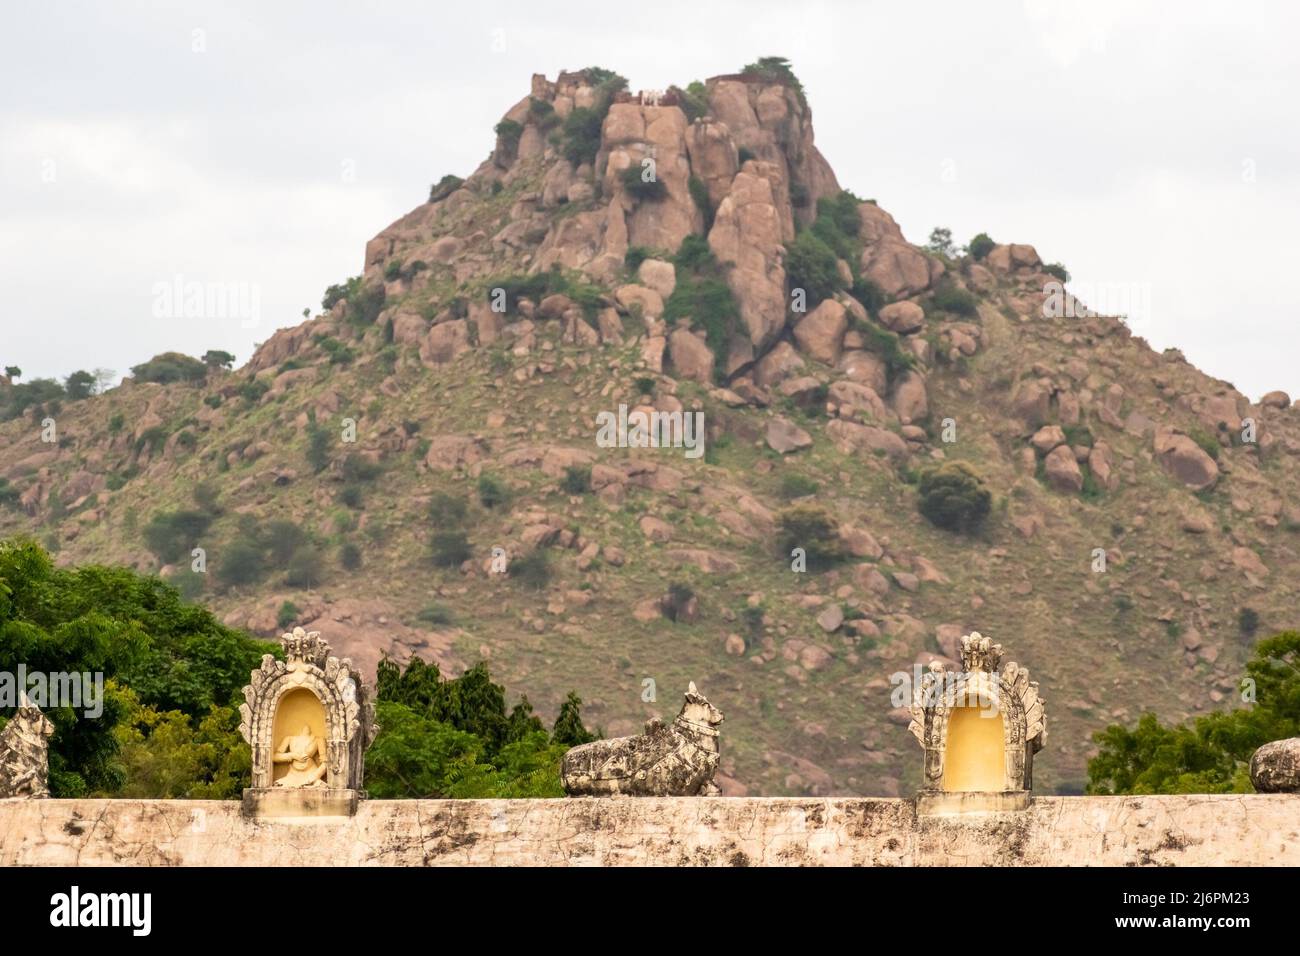 Ancient sculptures on the roof of the Hindu temple of Jalakdeswarar temple in the Vellore Fort complex with a rocky mountain in the background. Stock Photo